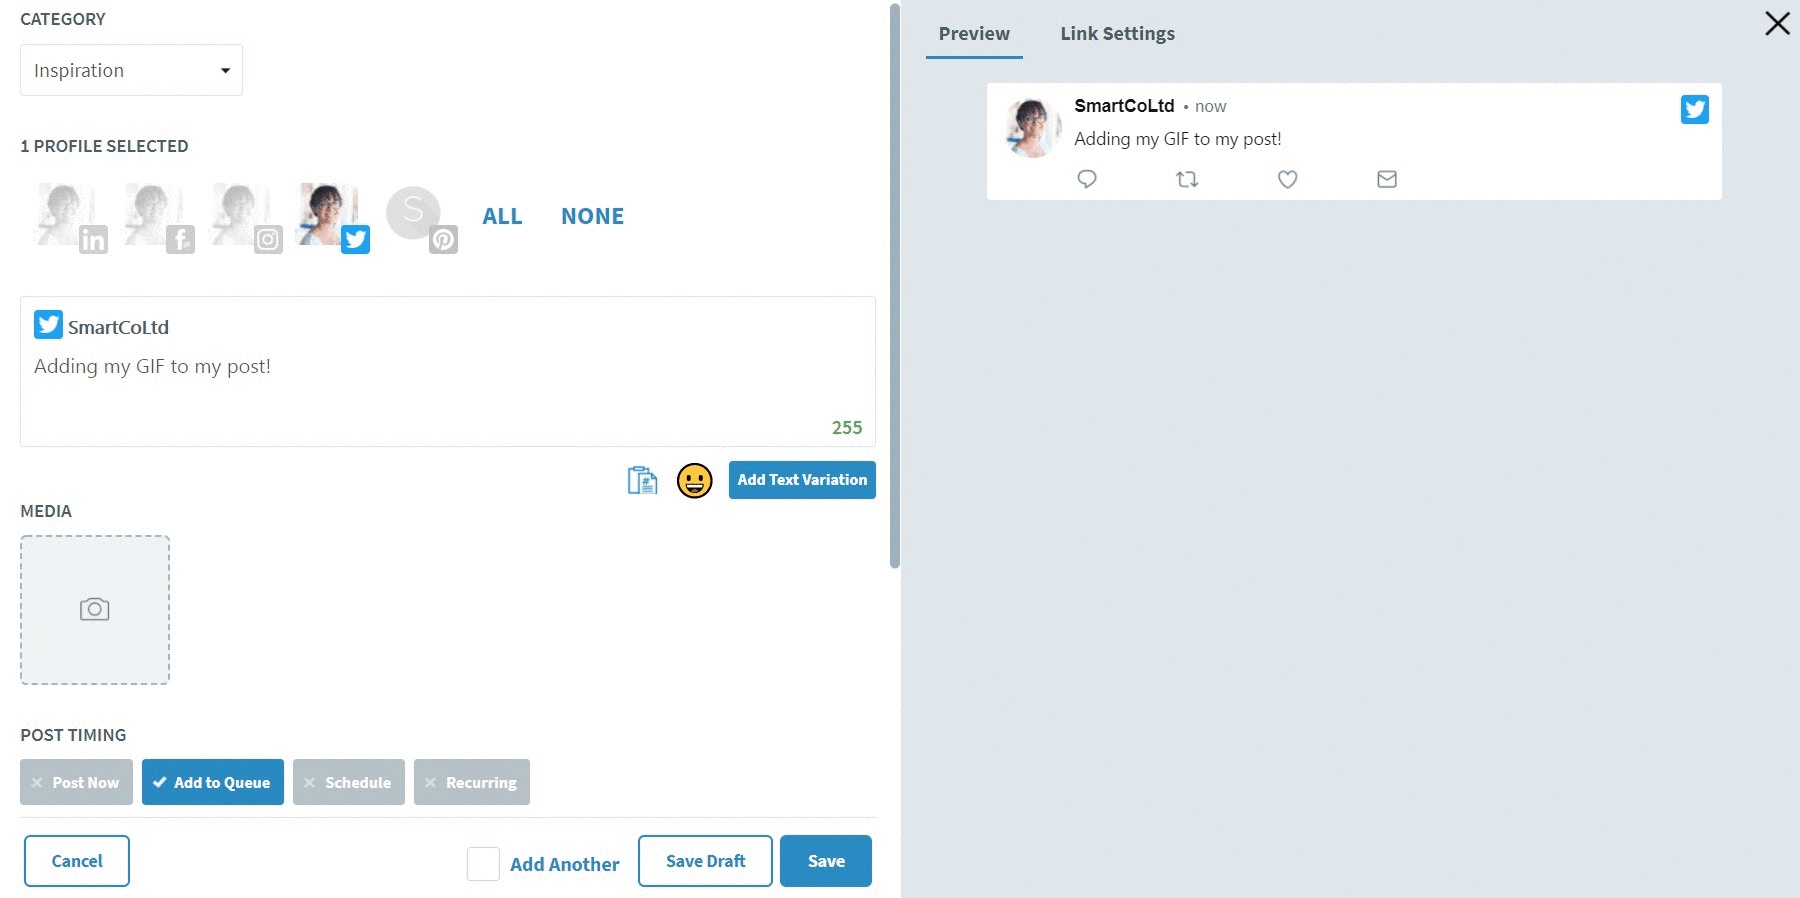 antreas xaralampous recommends How To Send A Gif On Skype